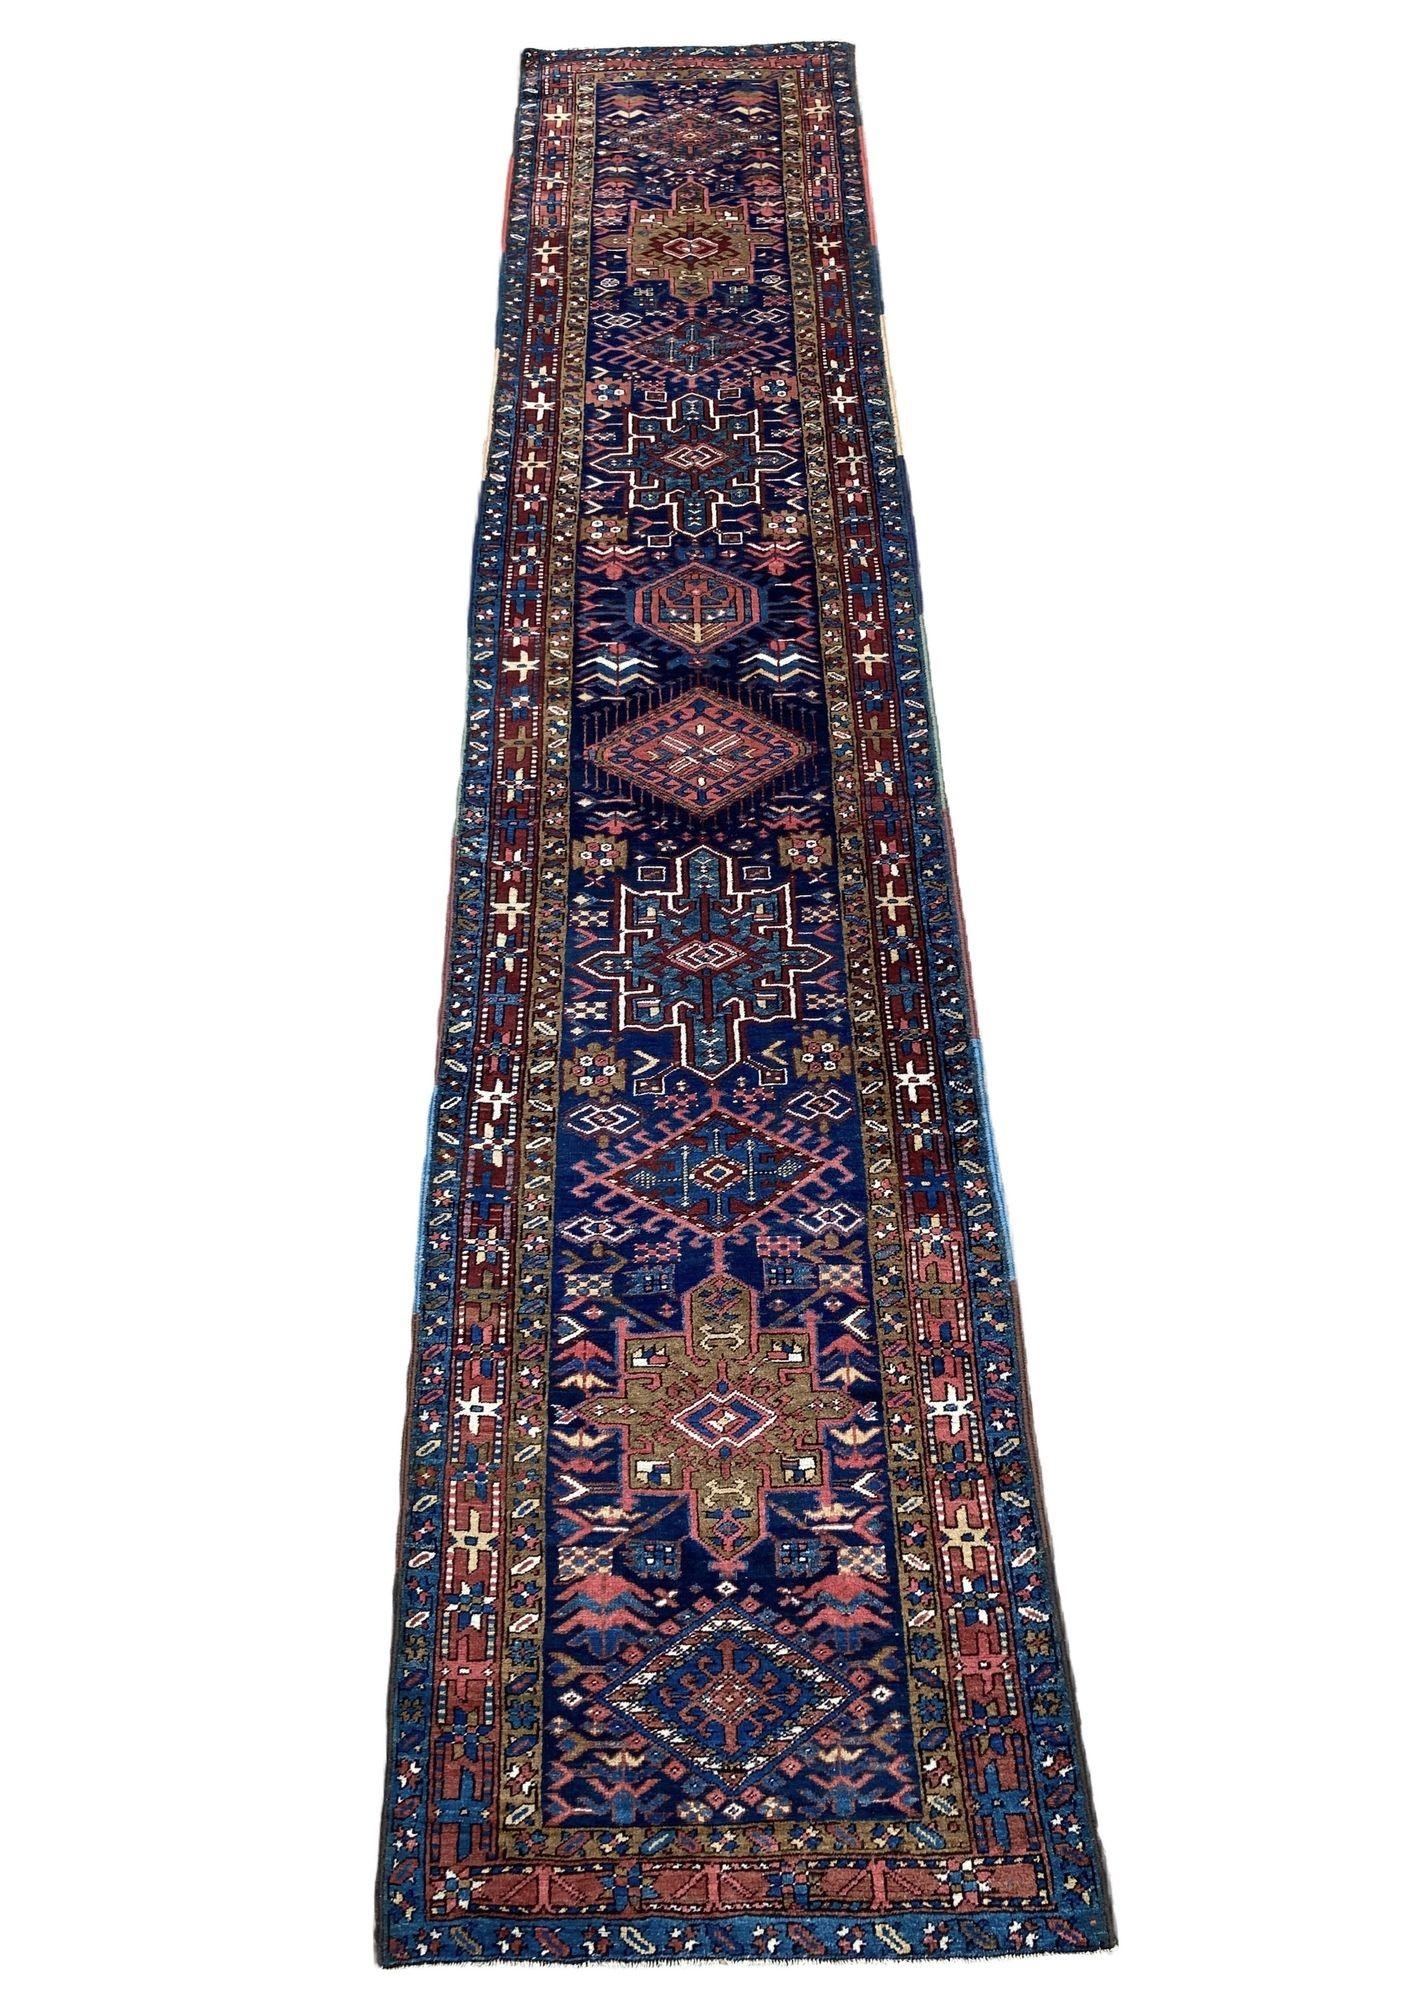 A fabulous antique Heriz runner, handwoven in circa 1900 with a geometrical design on a dark indigo field and terracotta border. Full of rustic charm and great secondary colours.
Size: 4.27m x 0.90m (14ft x 3ft)
This rug is in good condition with